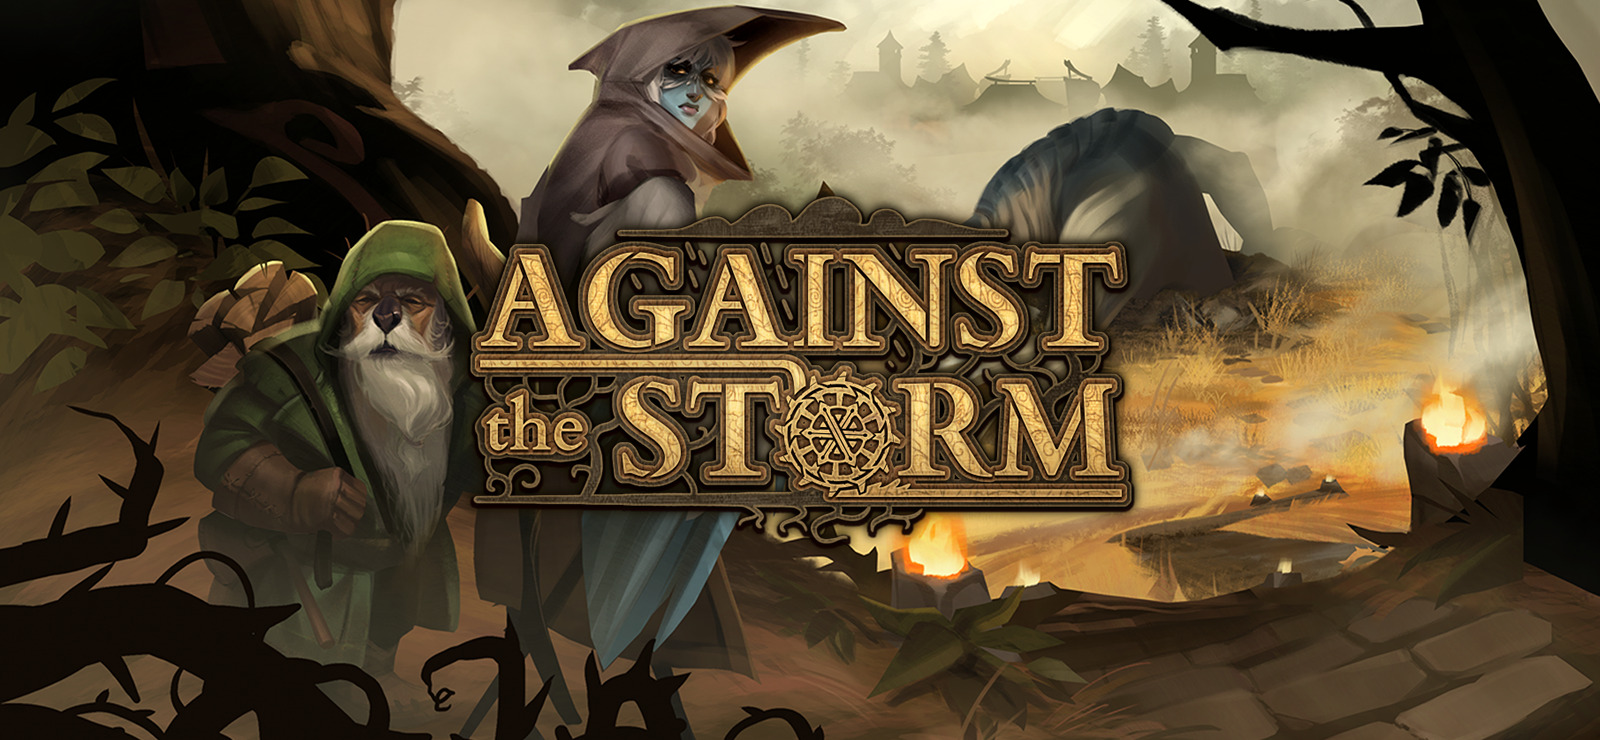 We re-released the Against the Storm Demo which offers unlimited